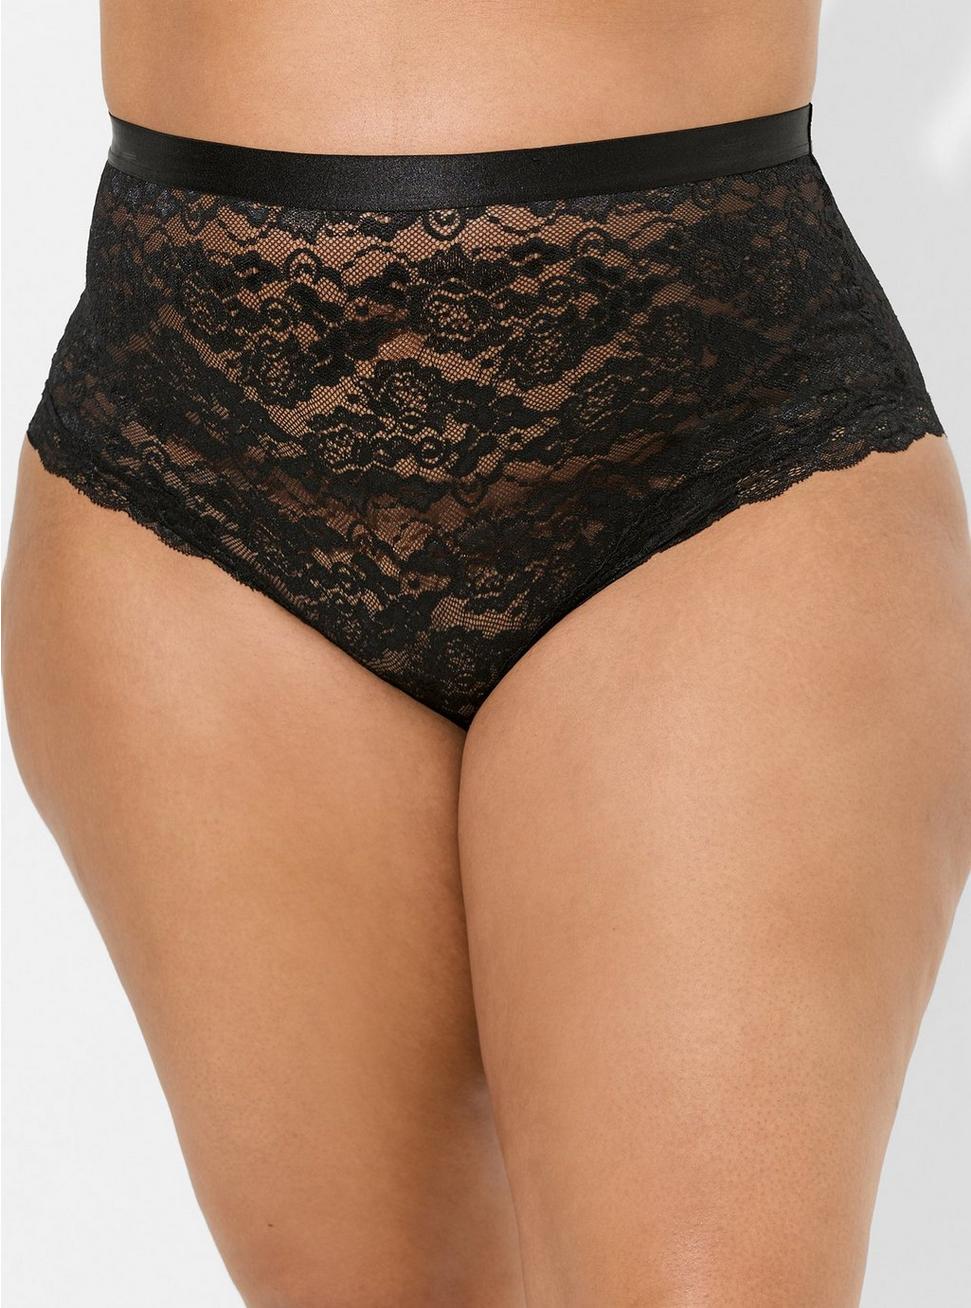 Lace High-Rise Cheeky Panty, RICH BLACK, hi-res